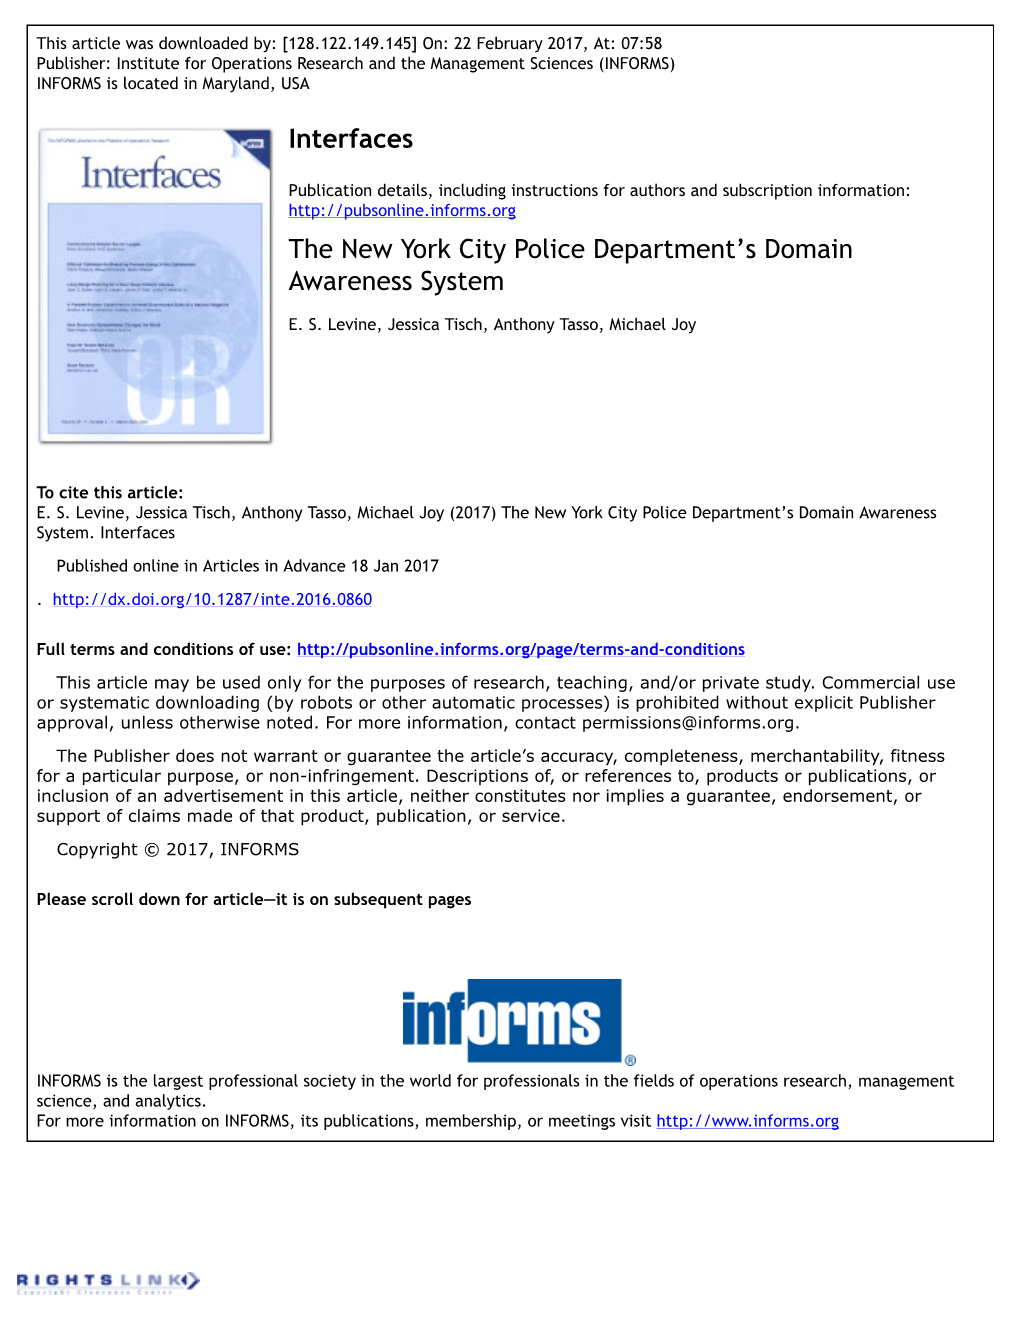 Interfaces the New York City Police Department's Domain Awareness